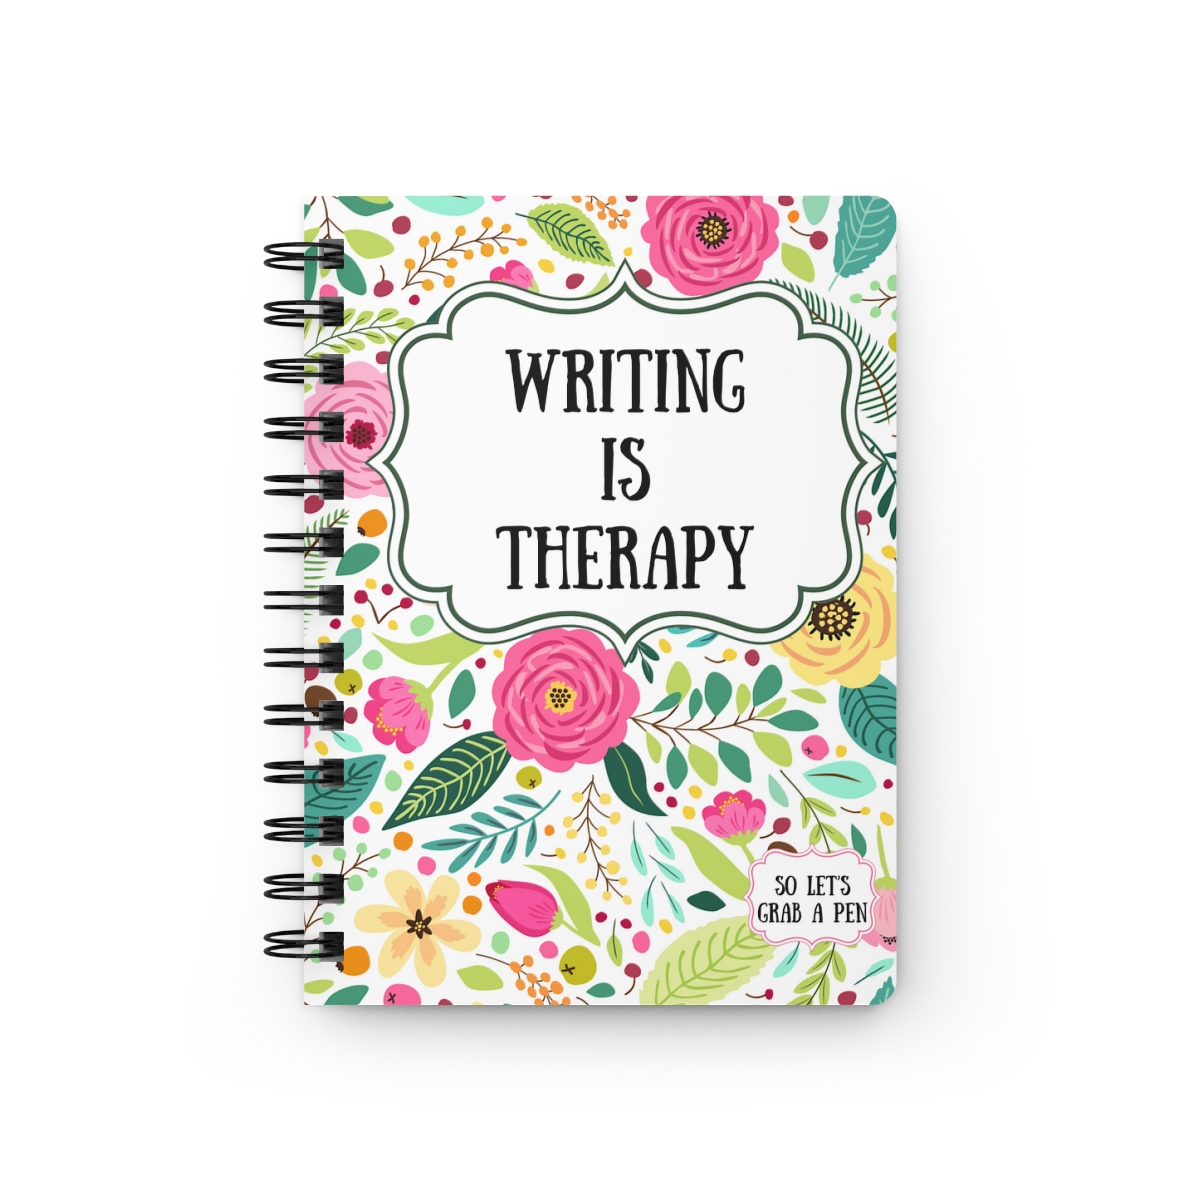 Writing is Therapy, so Let's Grab a Pen! product main image